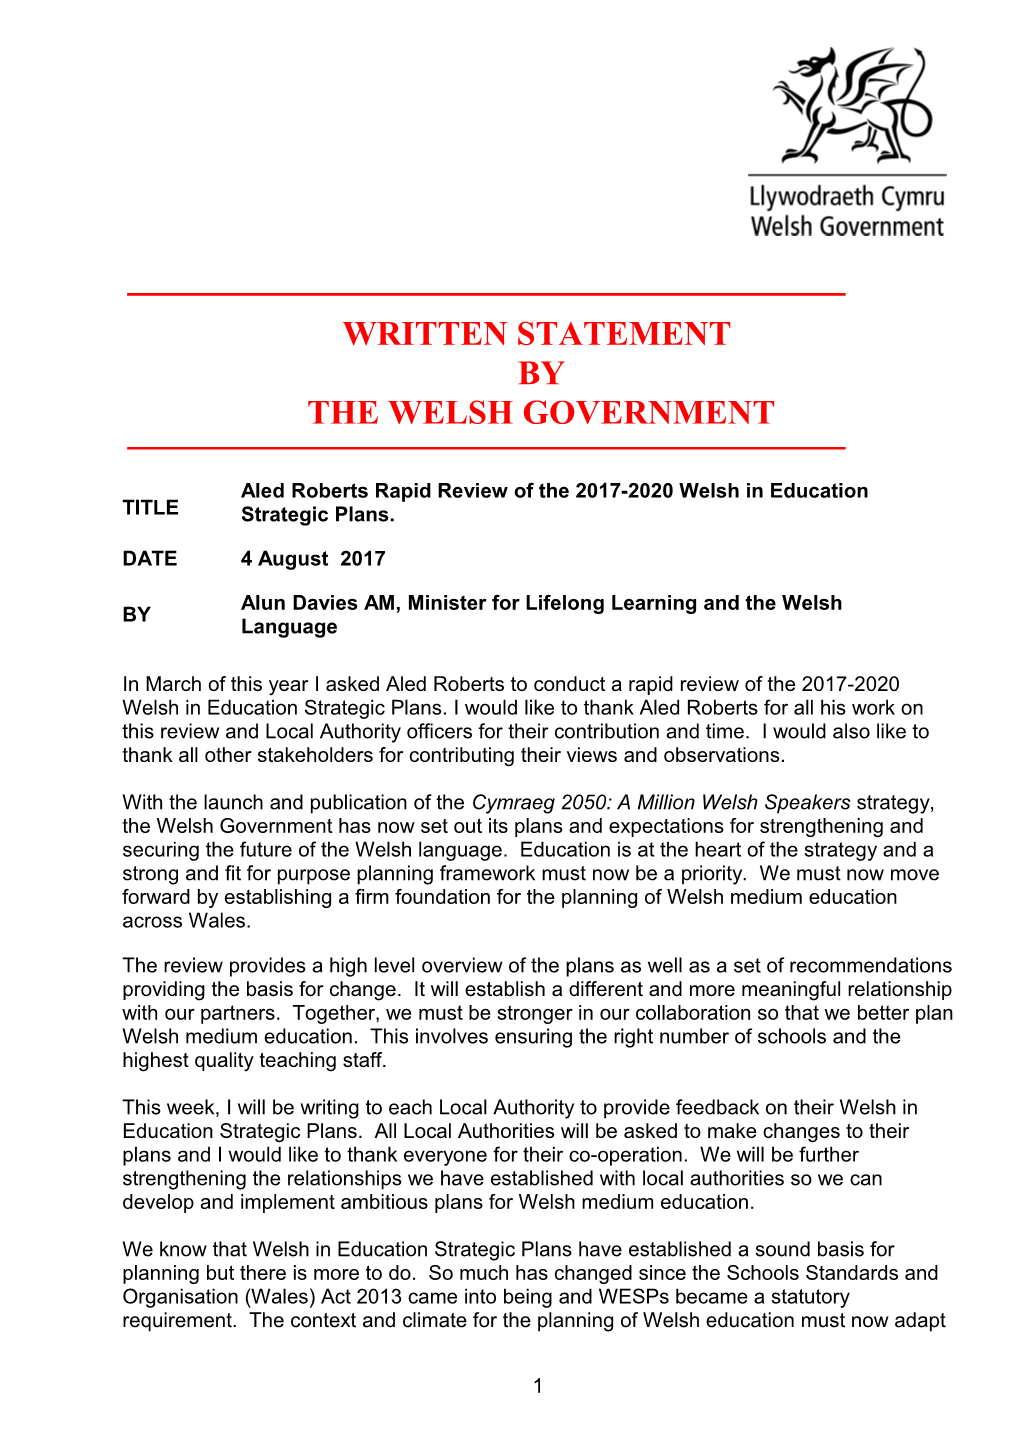 Aled Roberts Rapid Review of the 2017-2020 Welsh in Education Strategic Plans